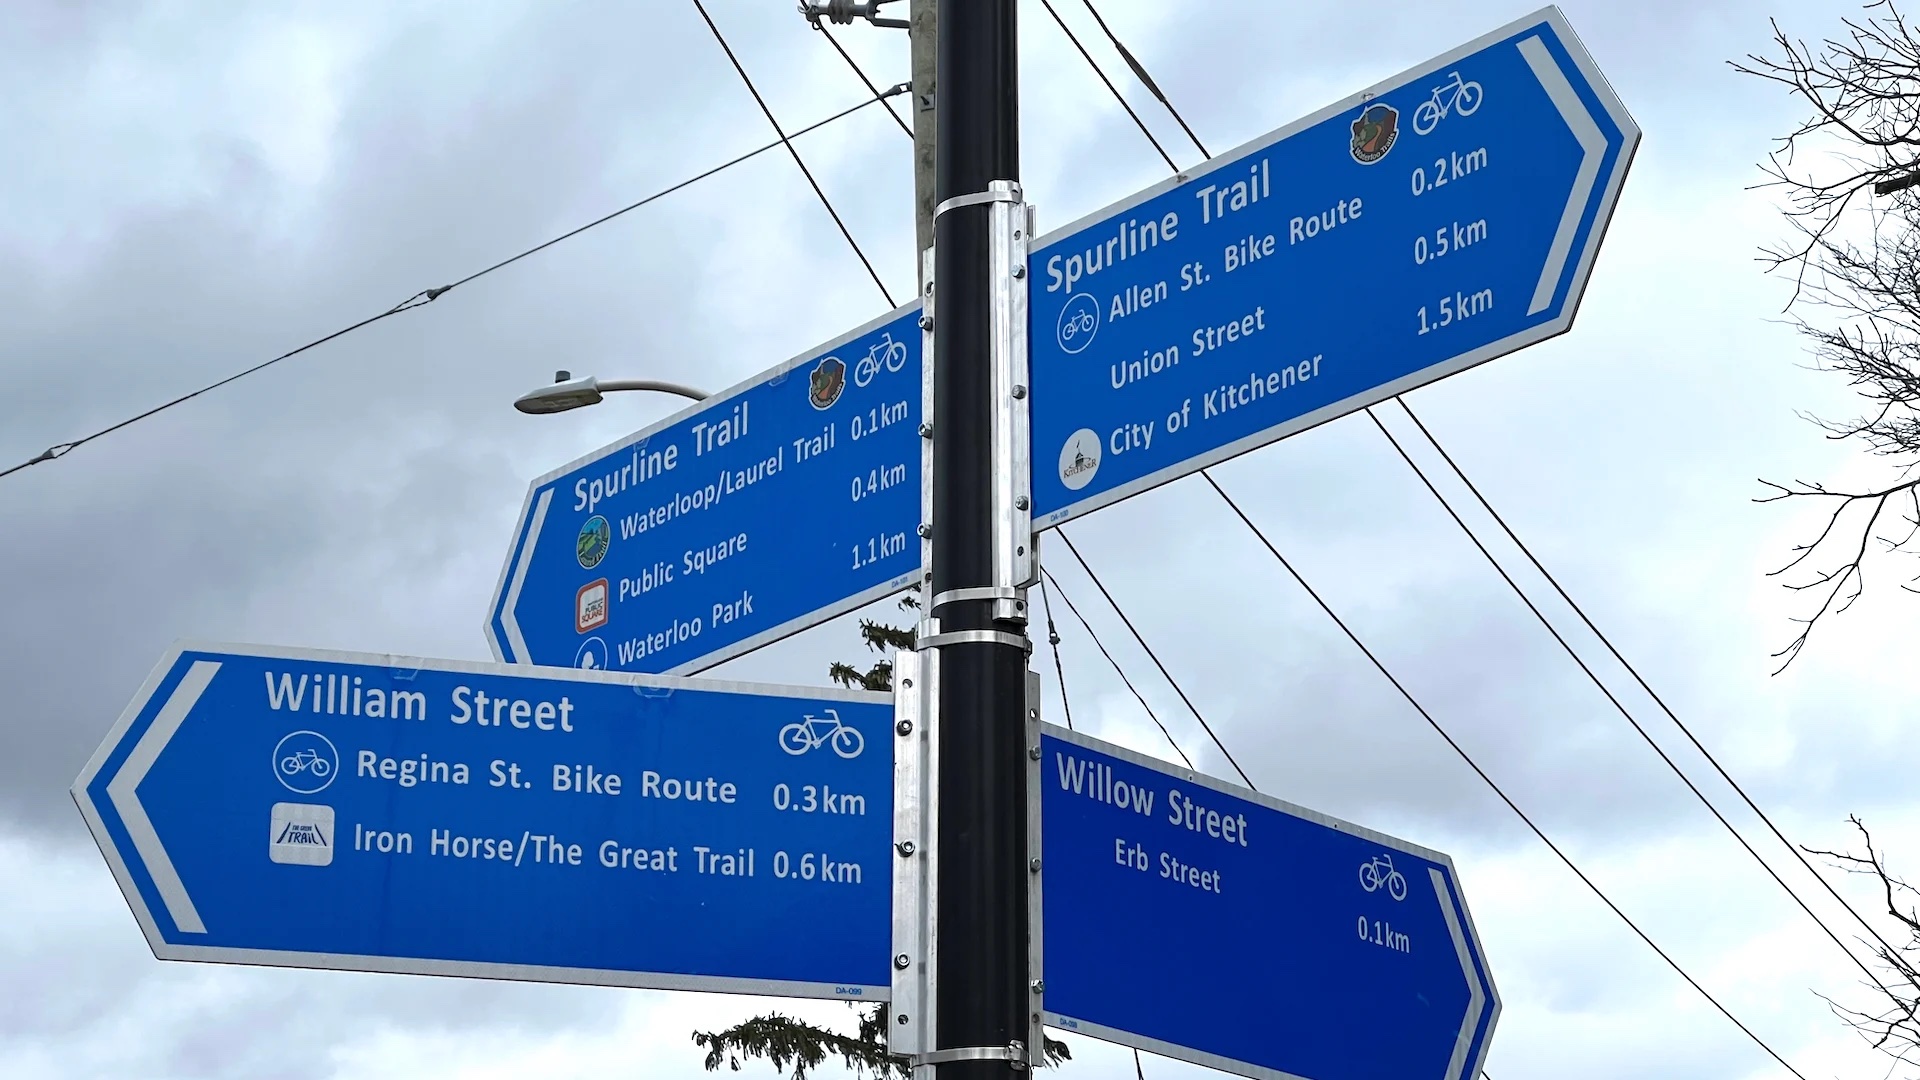 Blue directional signs point in four directions, mentioning "Spurline Trail", "William Street", Willow Street", and "Waterloo Park" among other things.